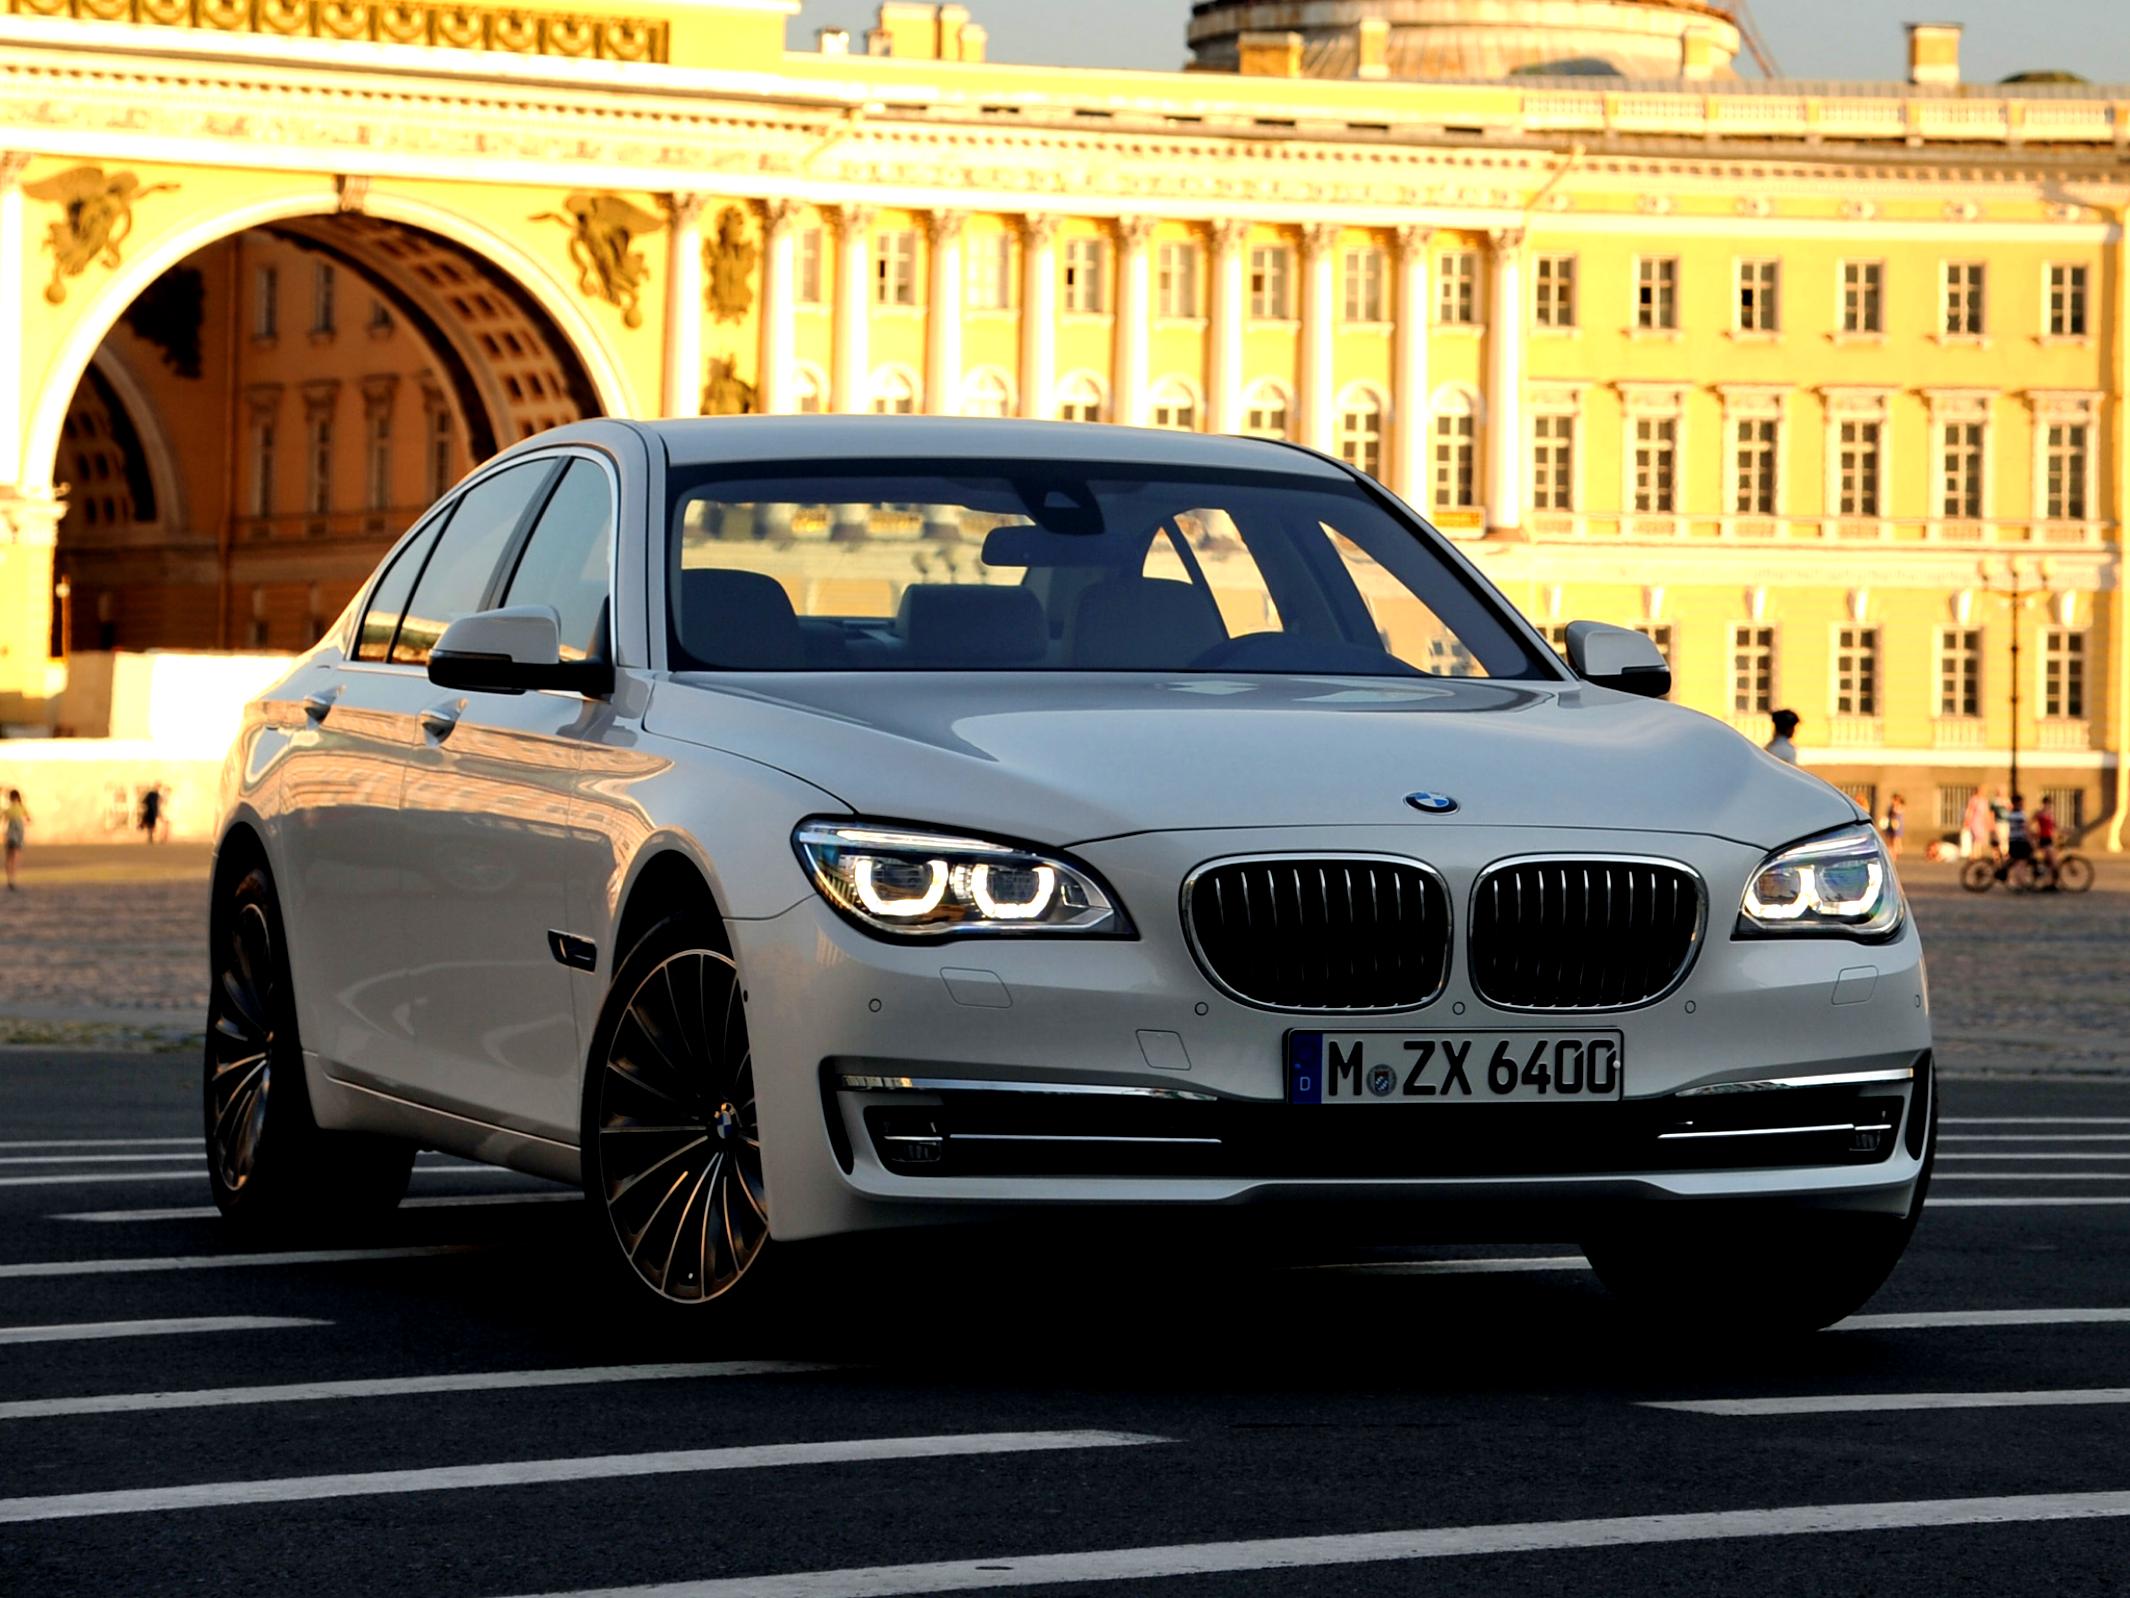 BMW 7 Series F01/02 Facelift 2012 #2